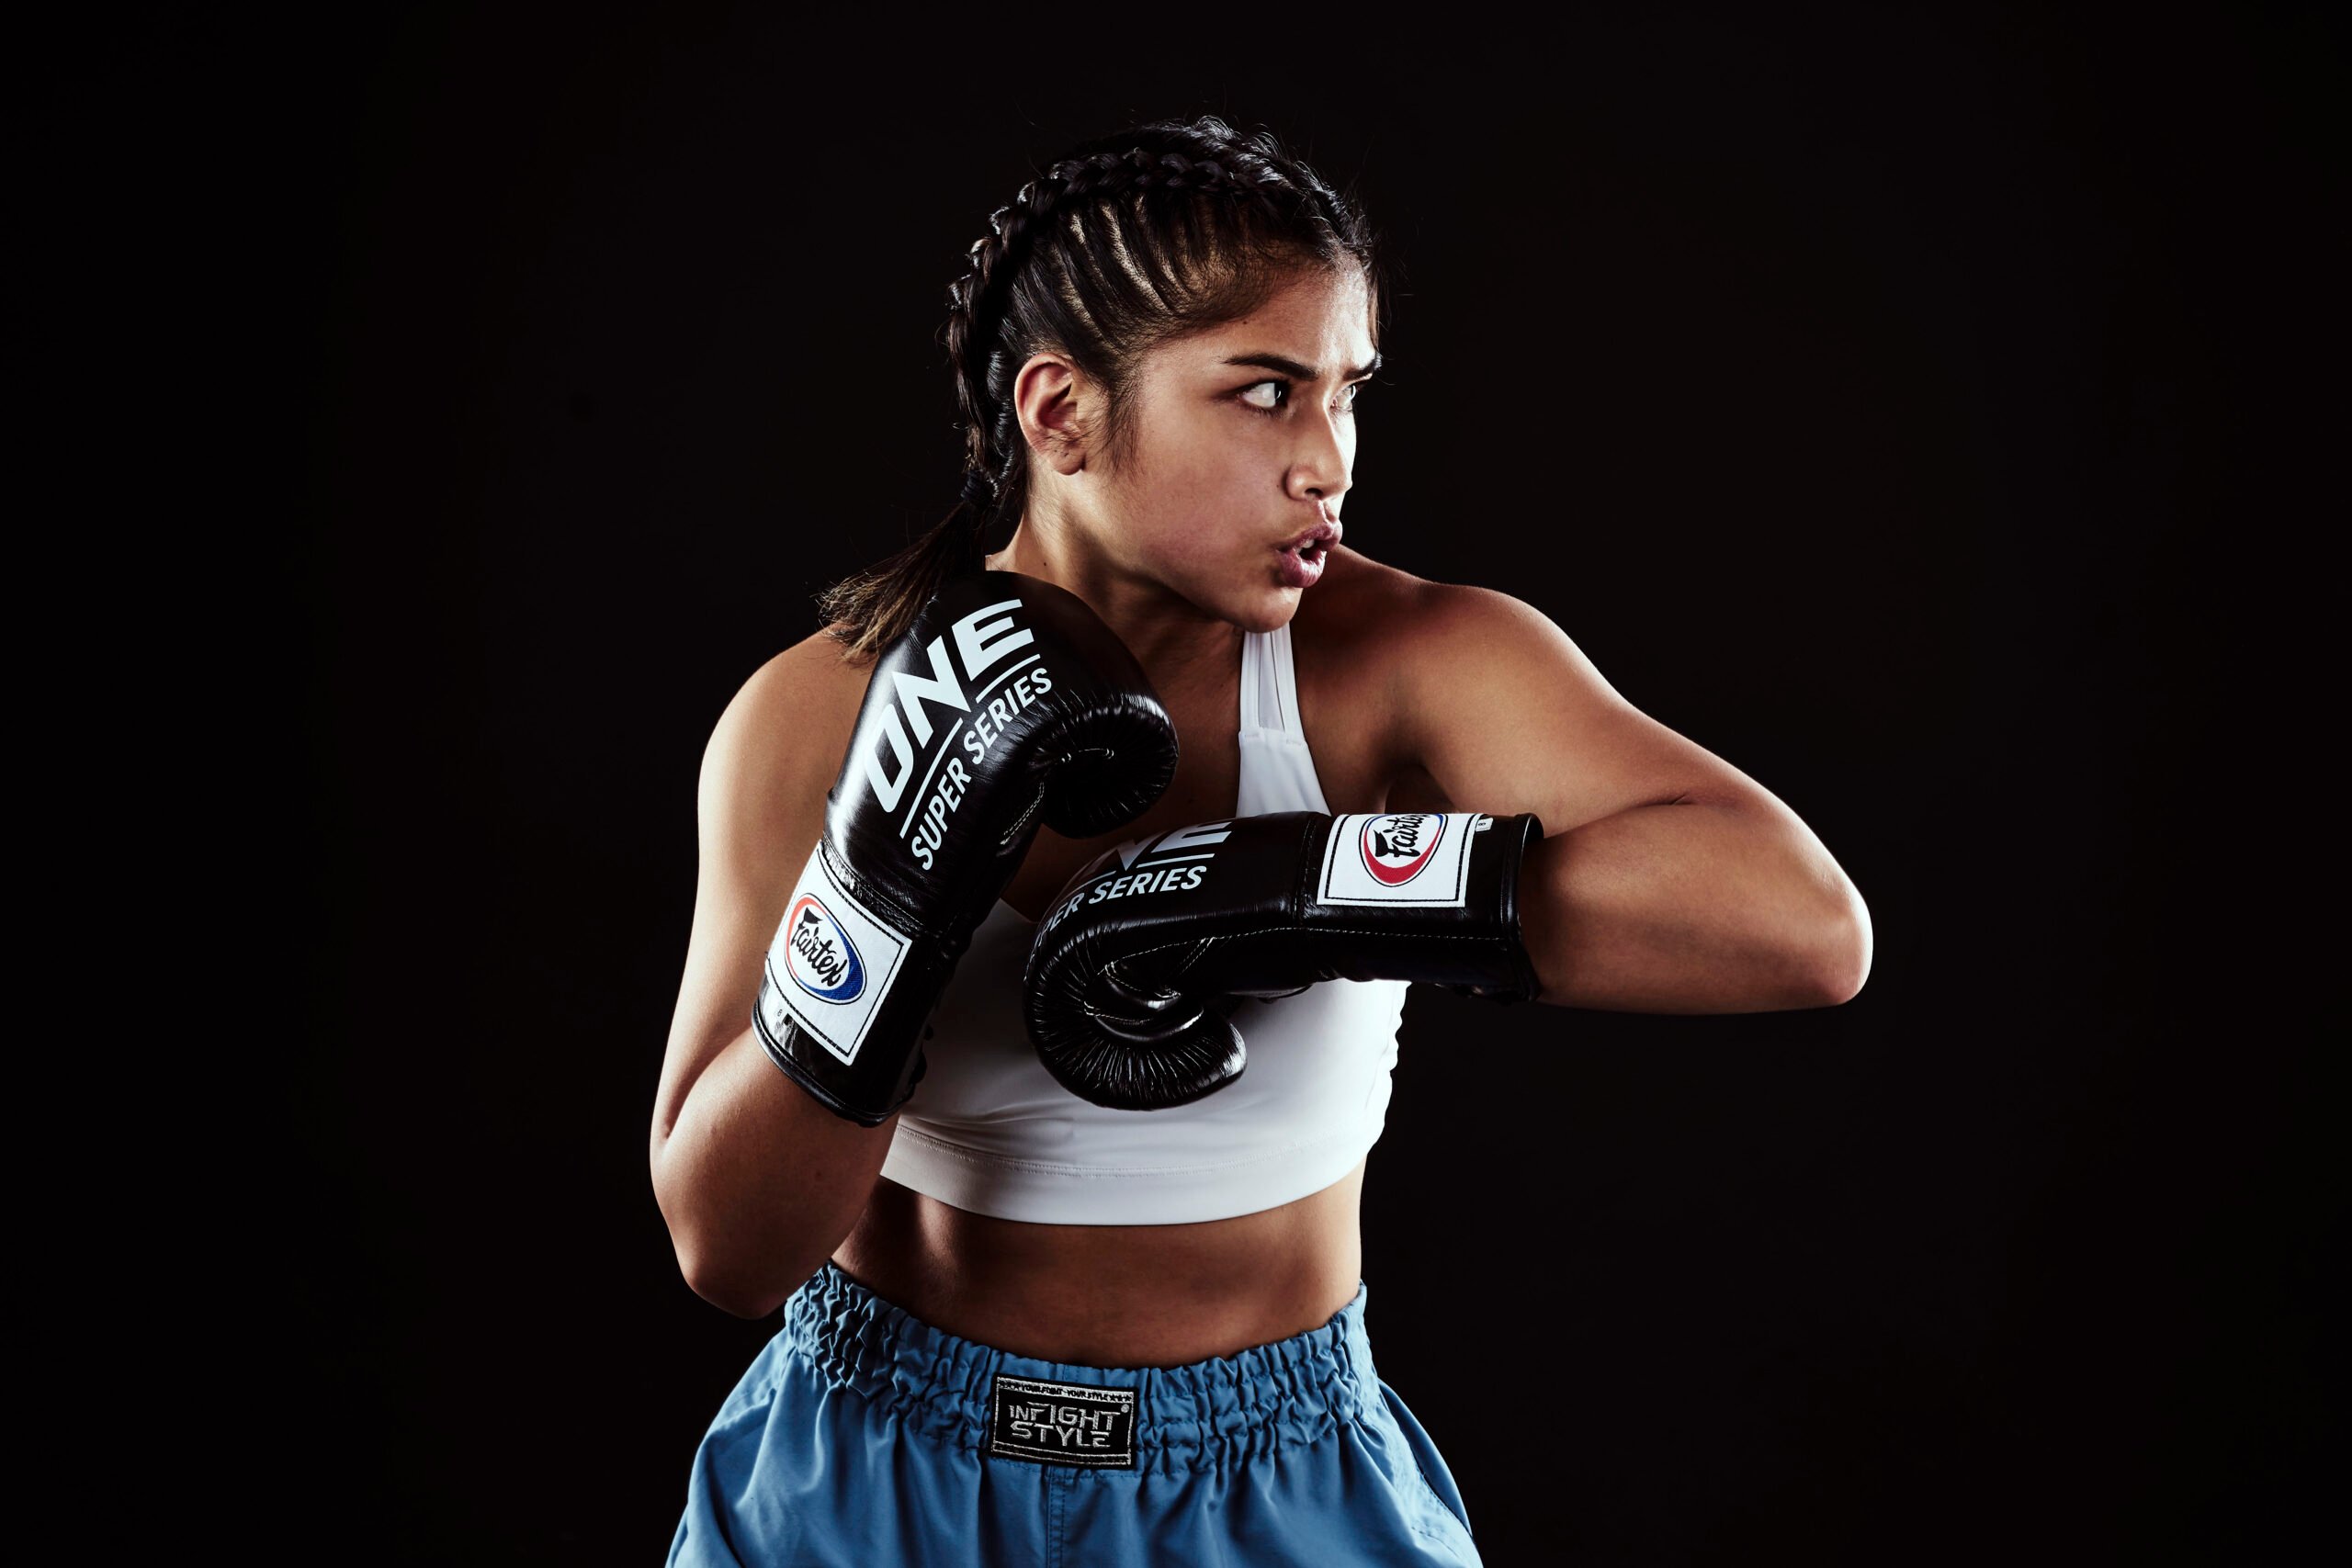 Jeff Dojillo's in-studio portrait of Jackie Buntan pulling out her moves in Infightsyle shorts and ONE Champrionship gloves